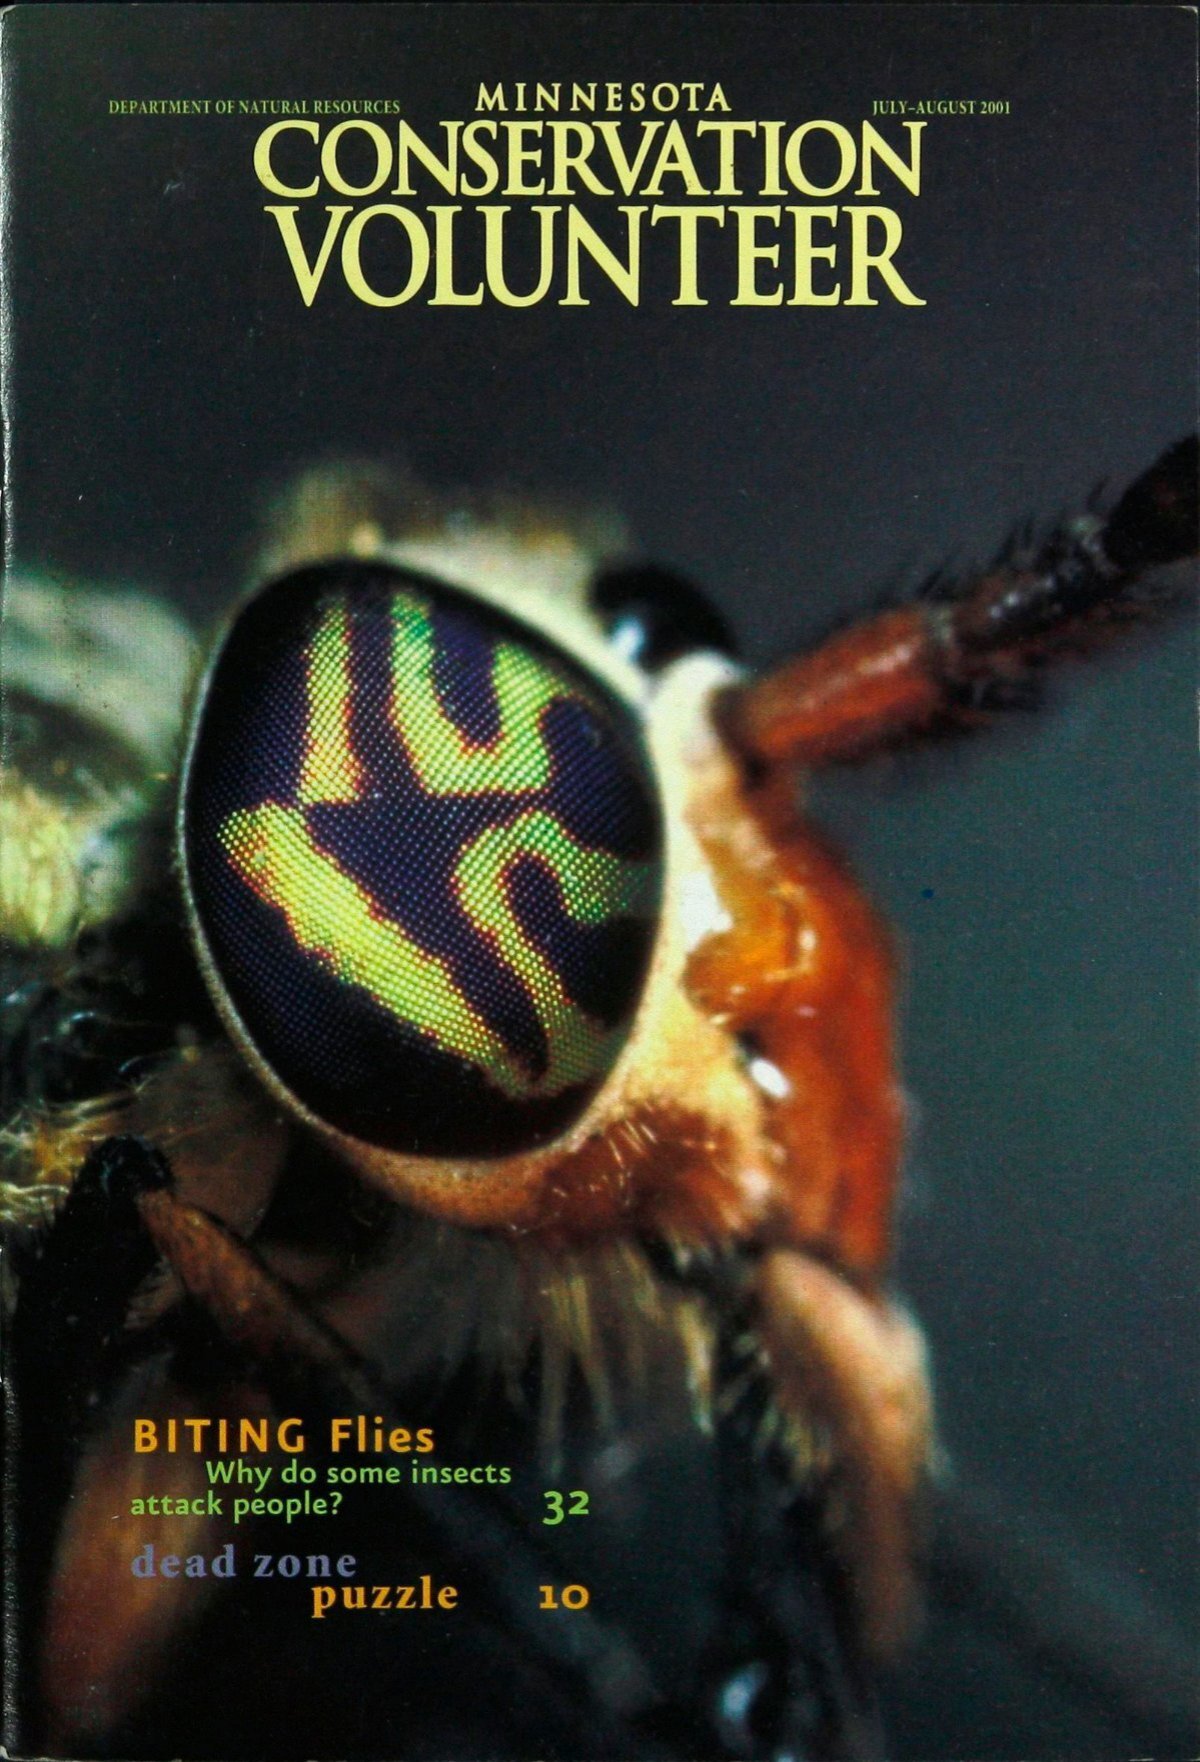 Pre-Owned Poul Jorgensen's Book of Fly Tying : A Guide to Flies